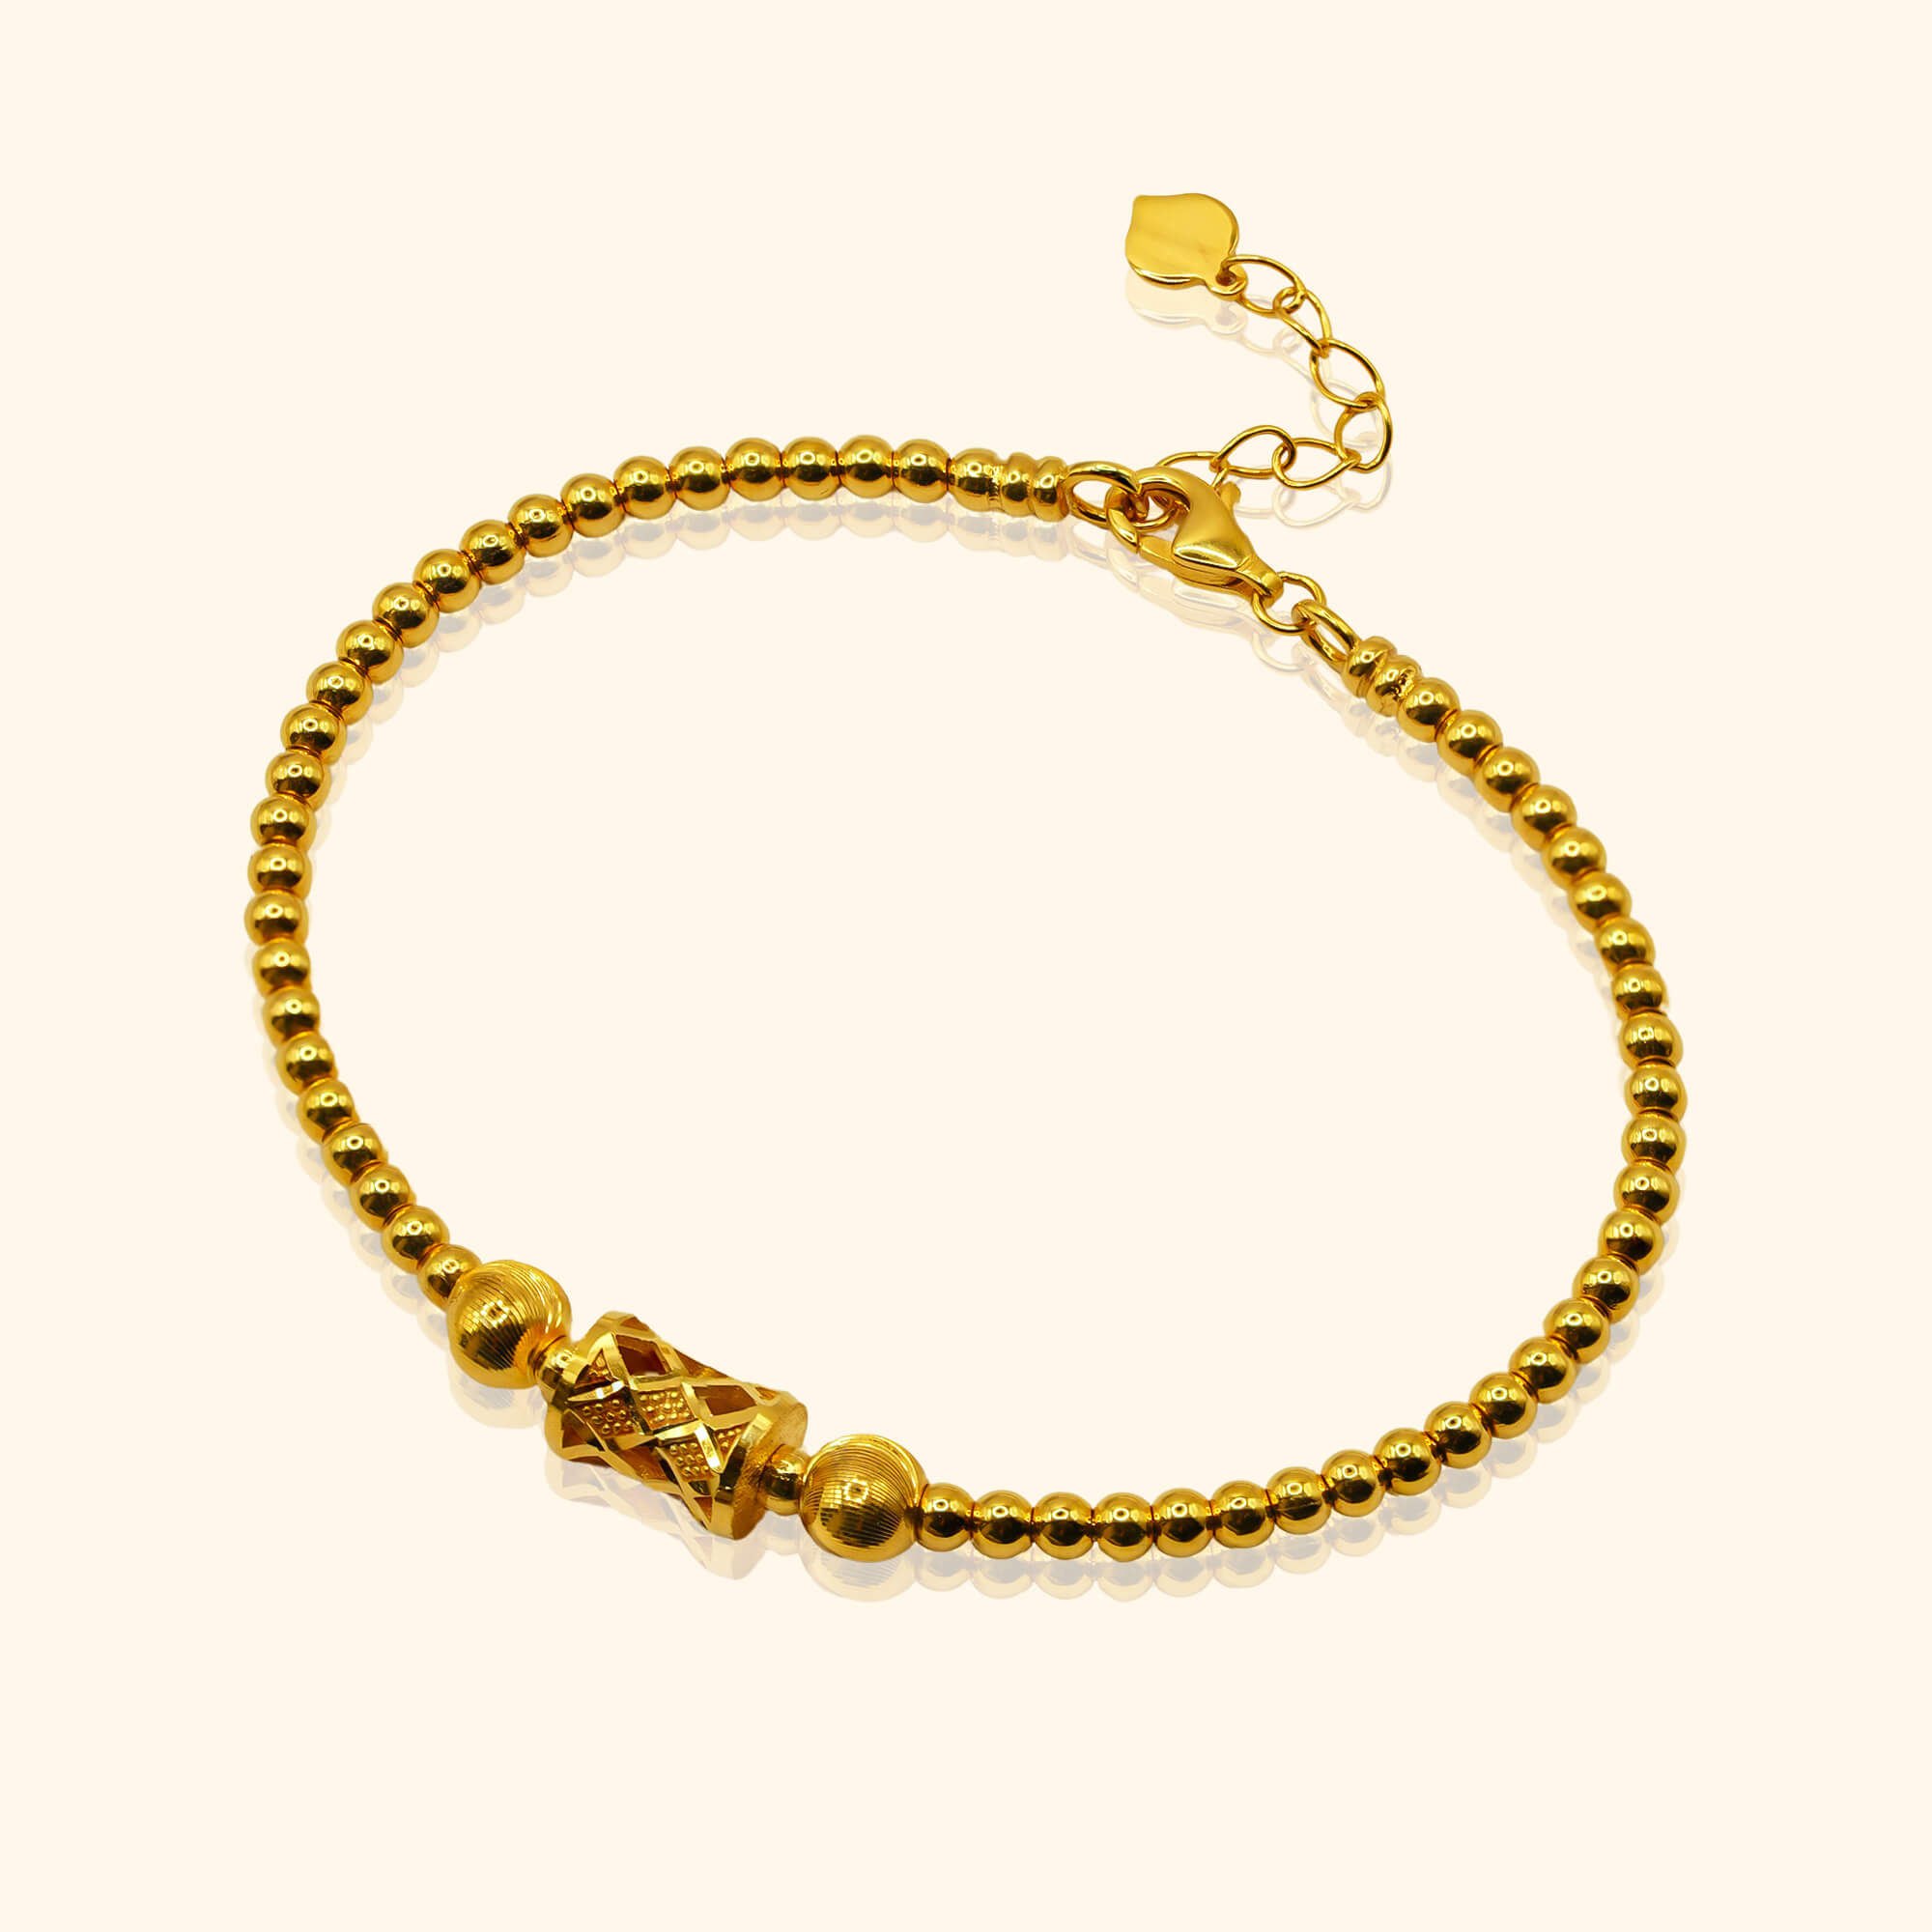 916 gold jewellery a bangle with a barrel spring design from top gold shop a cheapest gold jewellery in singapore